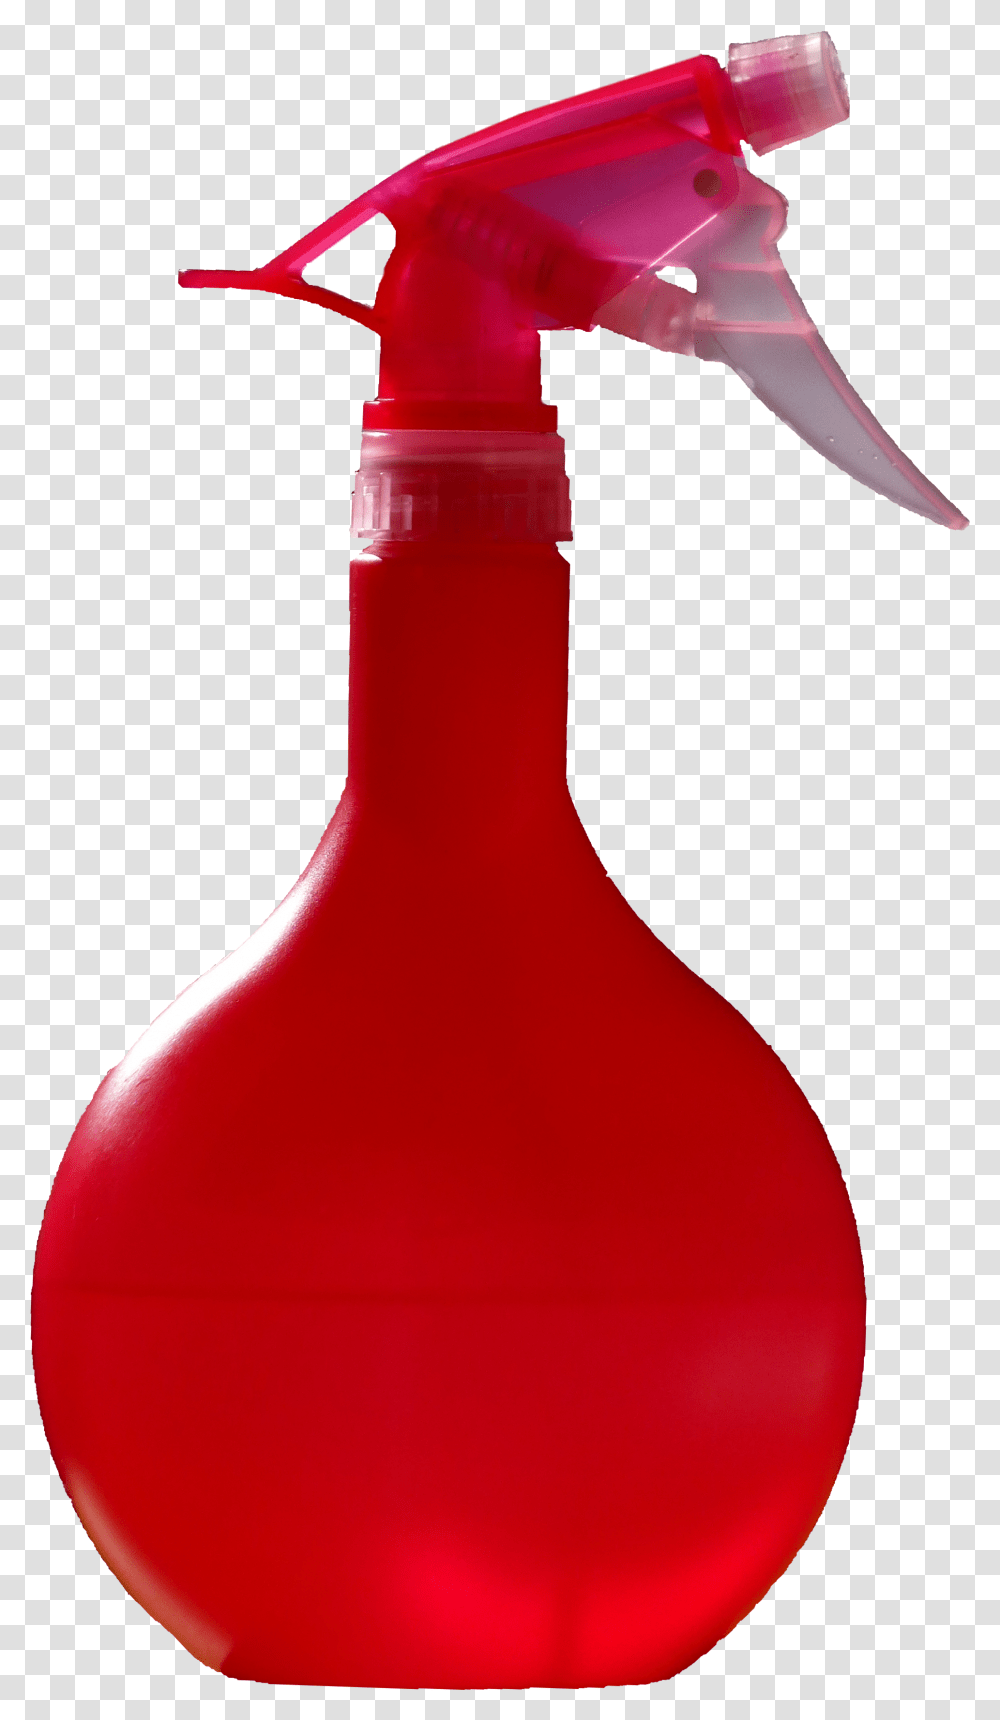 Filered Spray Bottle 1440426png Wikimedia Commons Red Spray Bottle, Beverage, Drink, Alcohol, Balloon Transparent Png